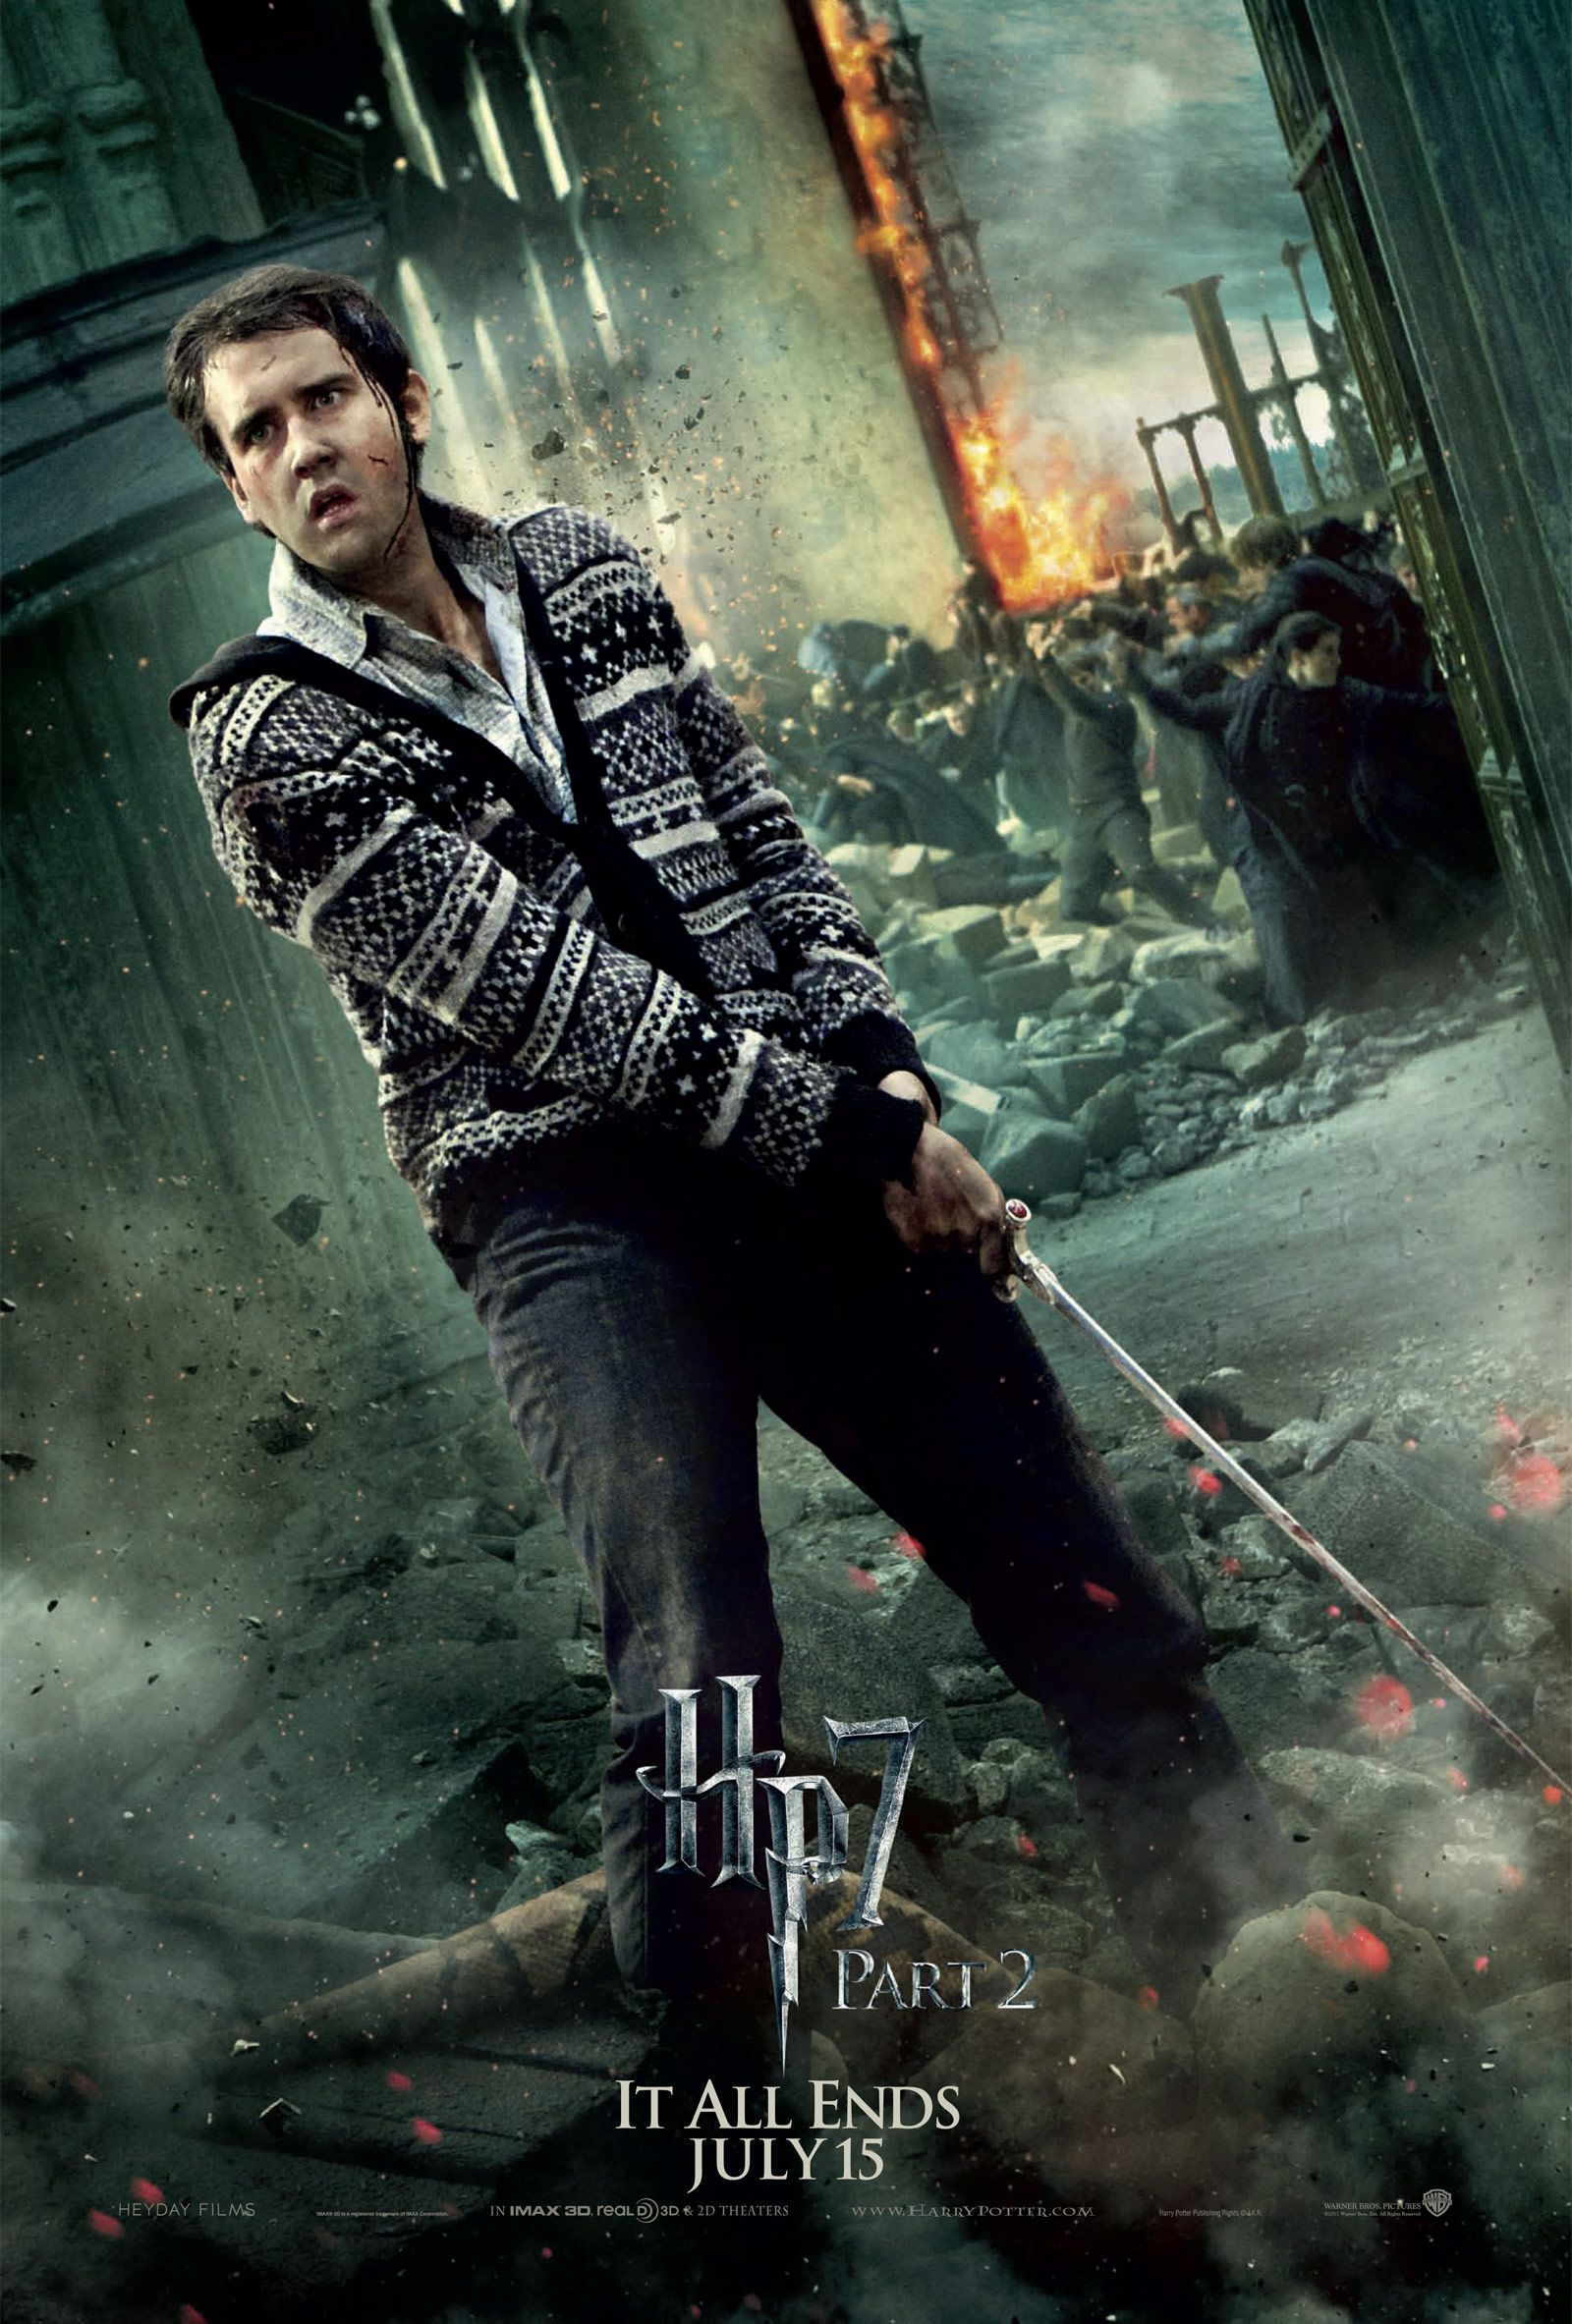 Harry Potter and the Deathly Hallows - Part 2 Neville Longbottom Character Poster